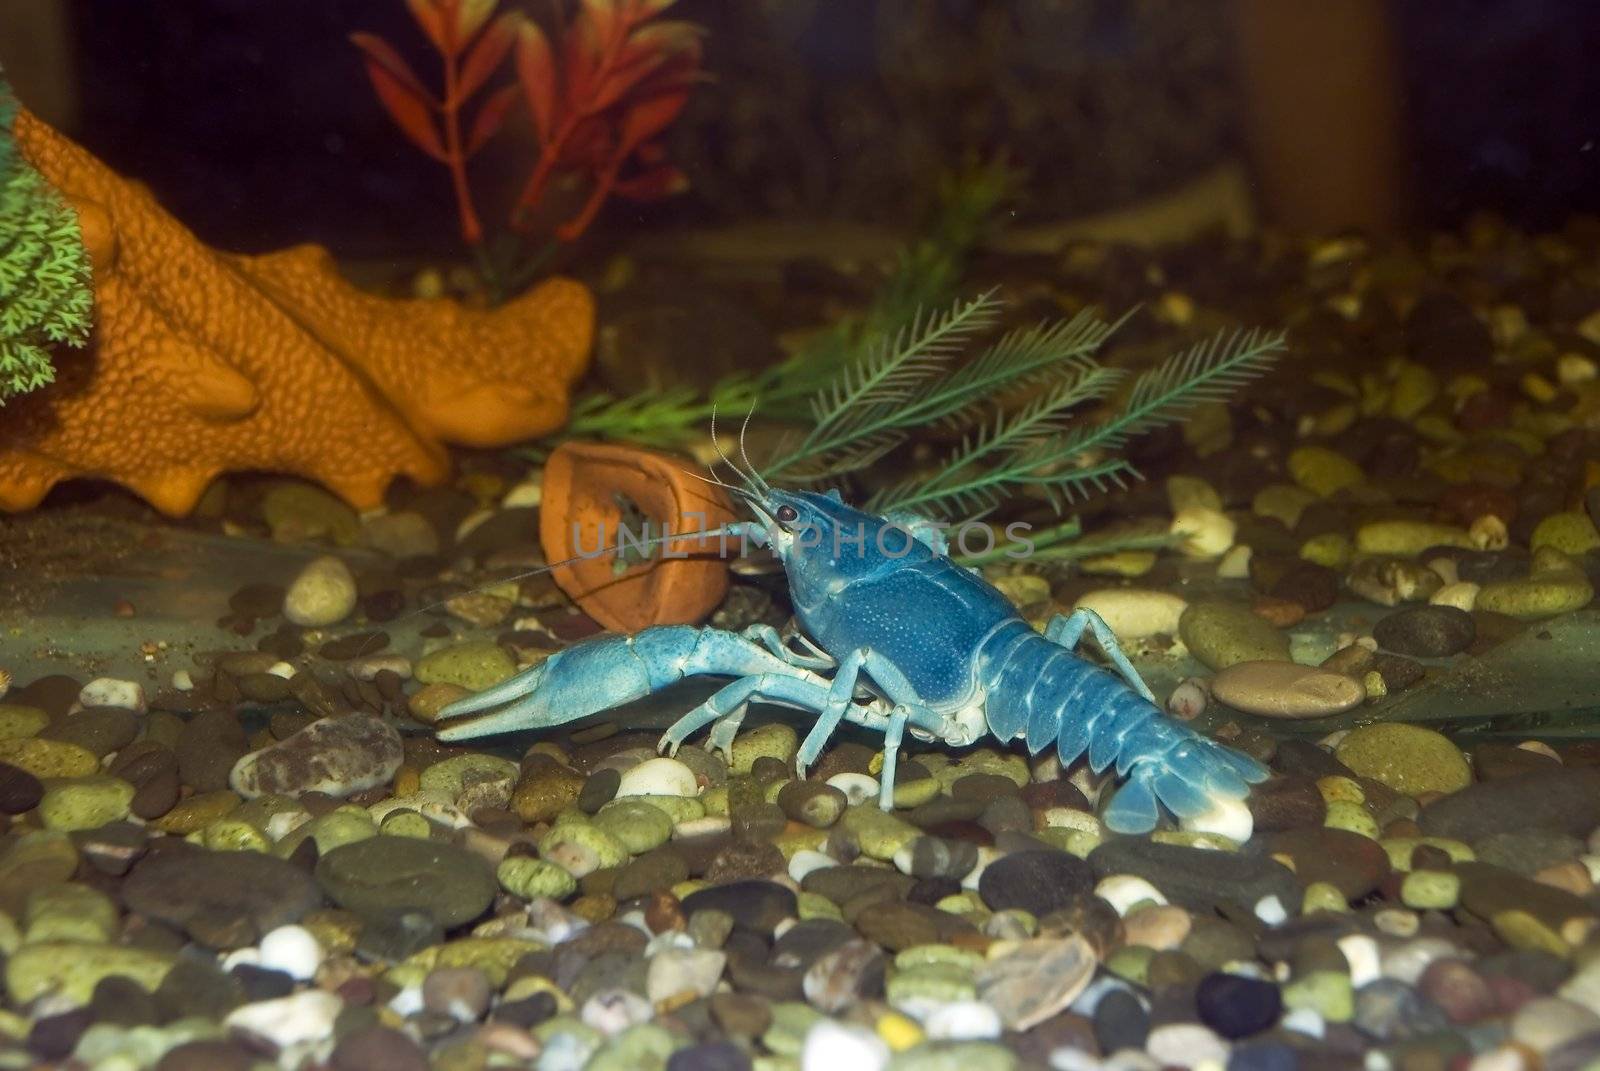 Blue crayfish. The crayfish of blue color - lives in the black sea